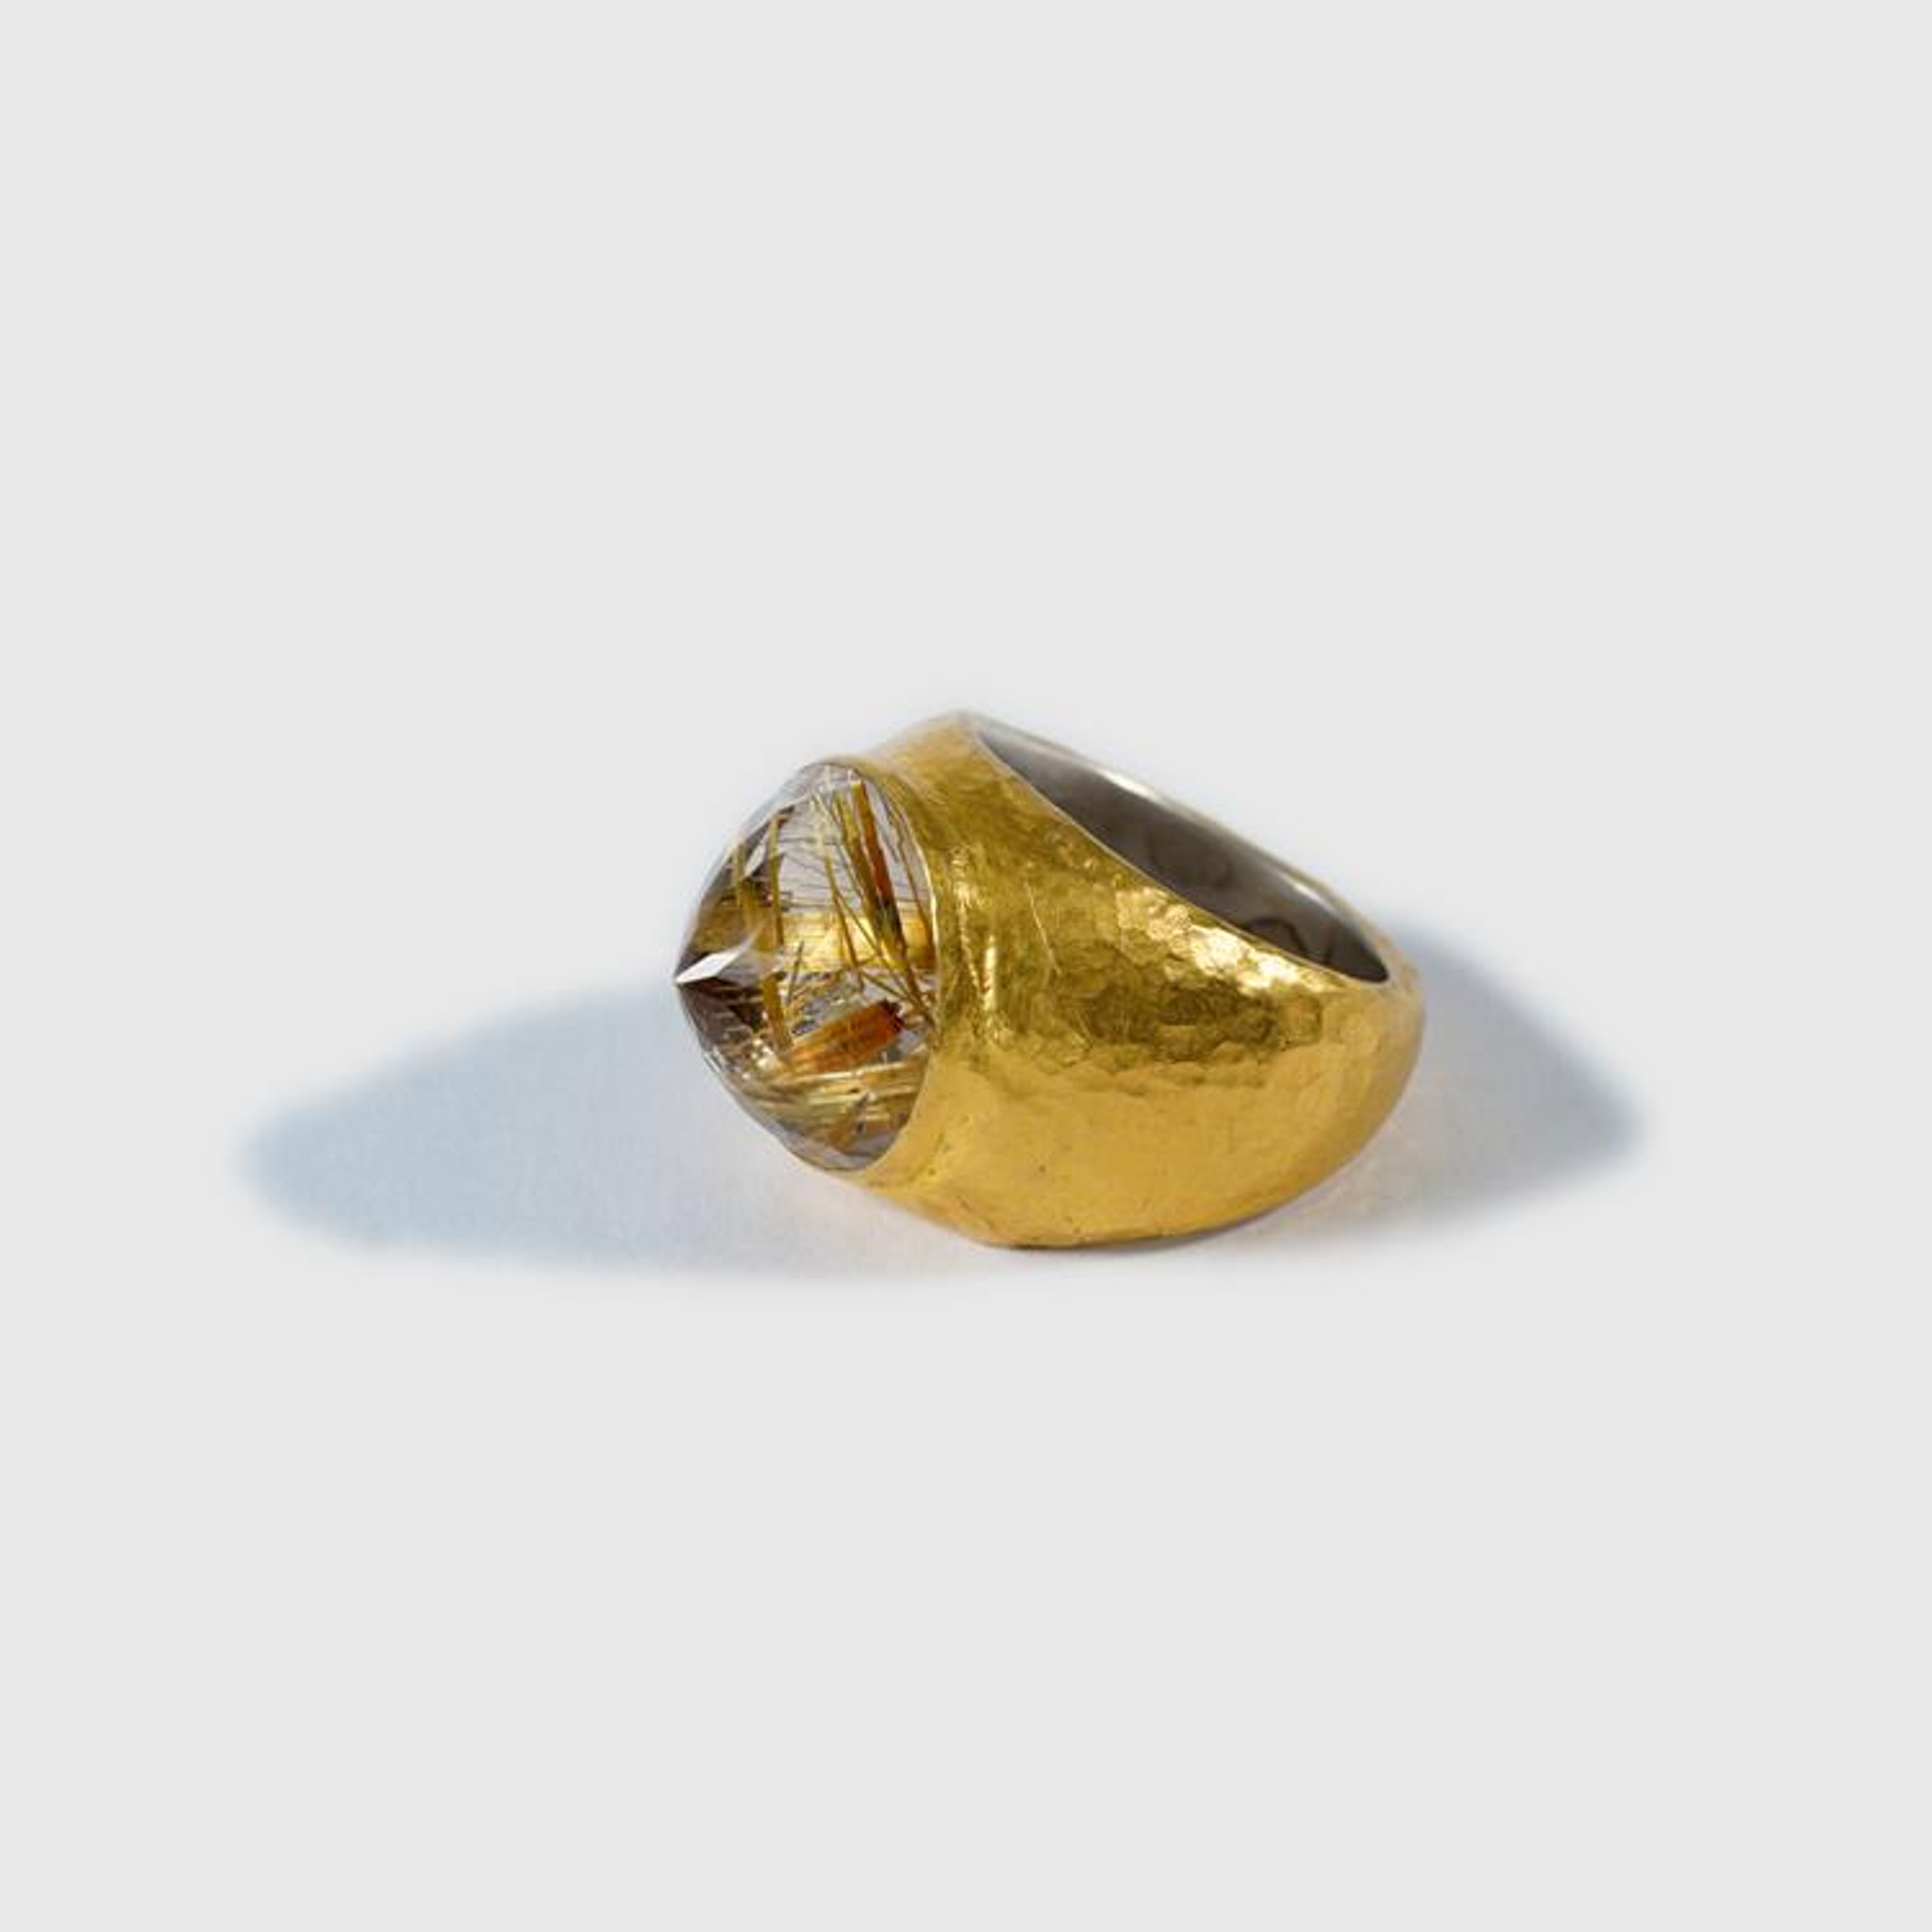 14ct Rutilated Quartz, Large Statement Cocktail Ring, Faceted Pointed Golden Quartz, 24K Gold and Silver, Handmade by Prehistoric Works of Istanbul, Turkey, Size 7 1/2 US Ring details: Rutilated Quartz - 14ct, 24K gold - 3.70 grams, Sterling silver - 9.20 grams - Size 7 1/2 US (In Stock)